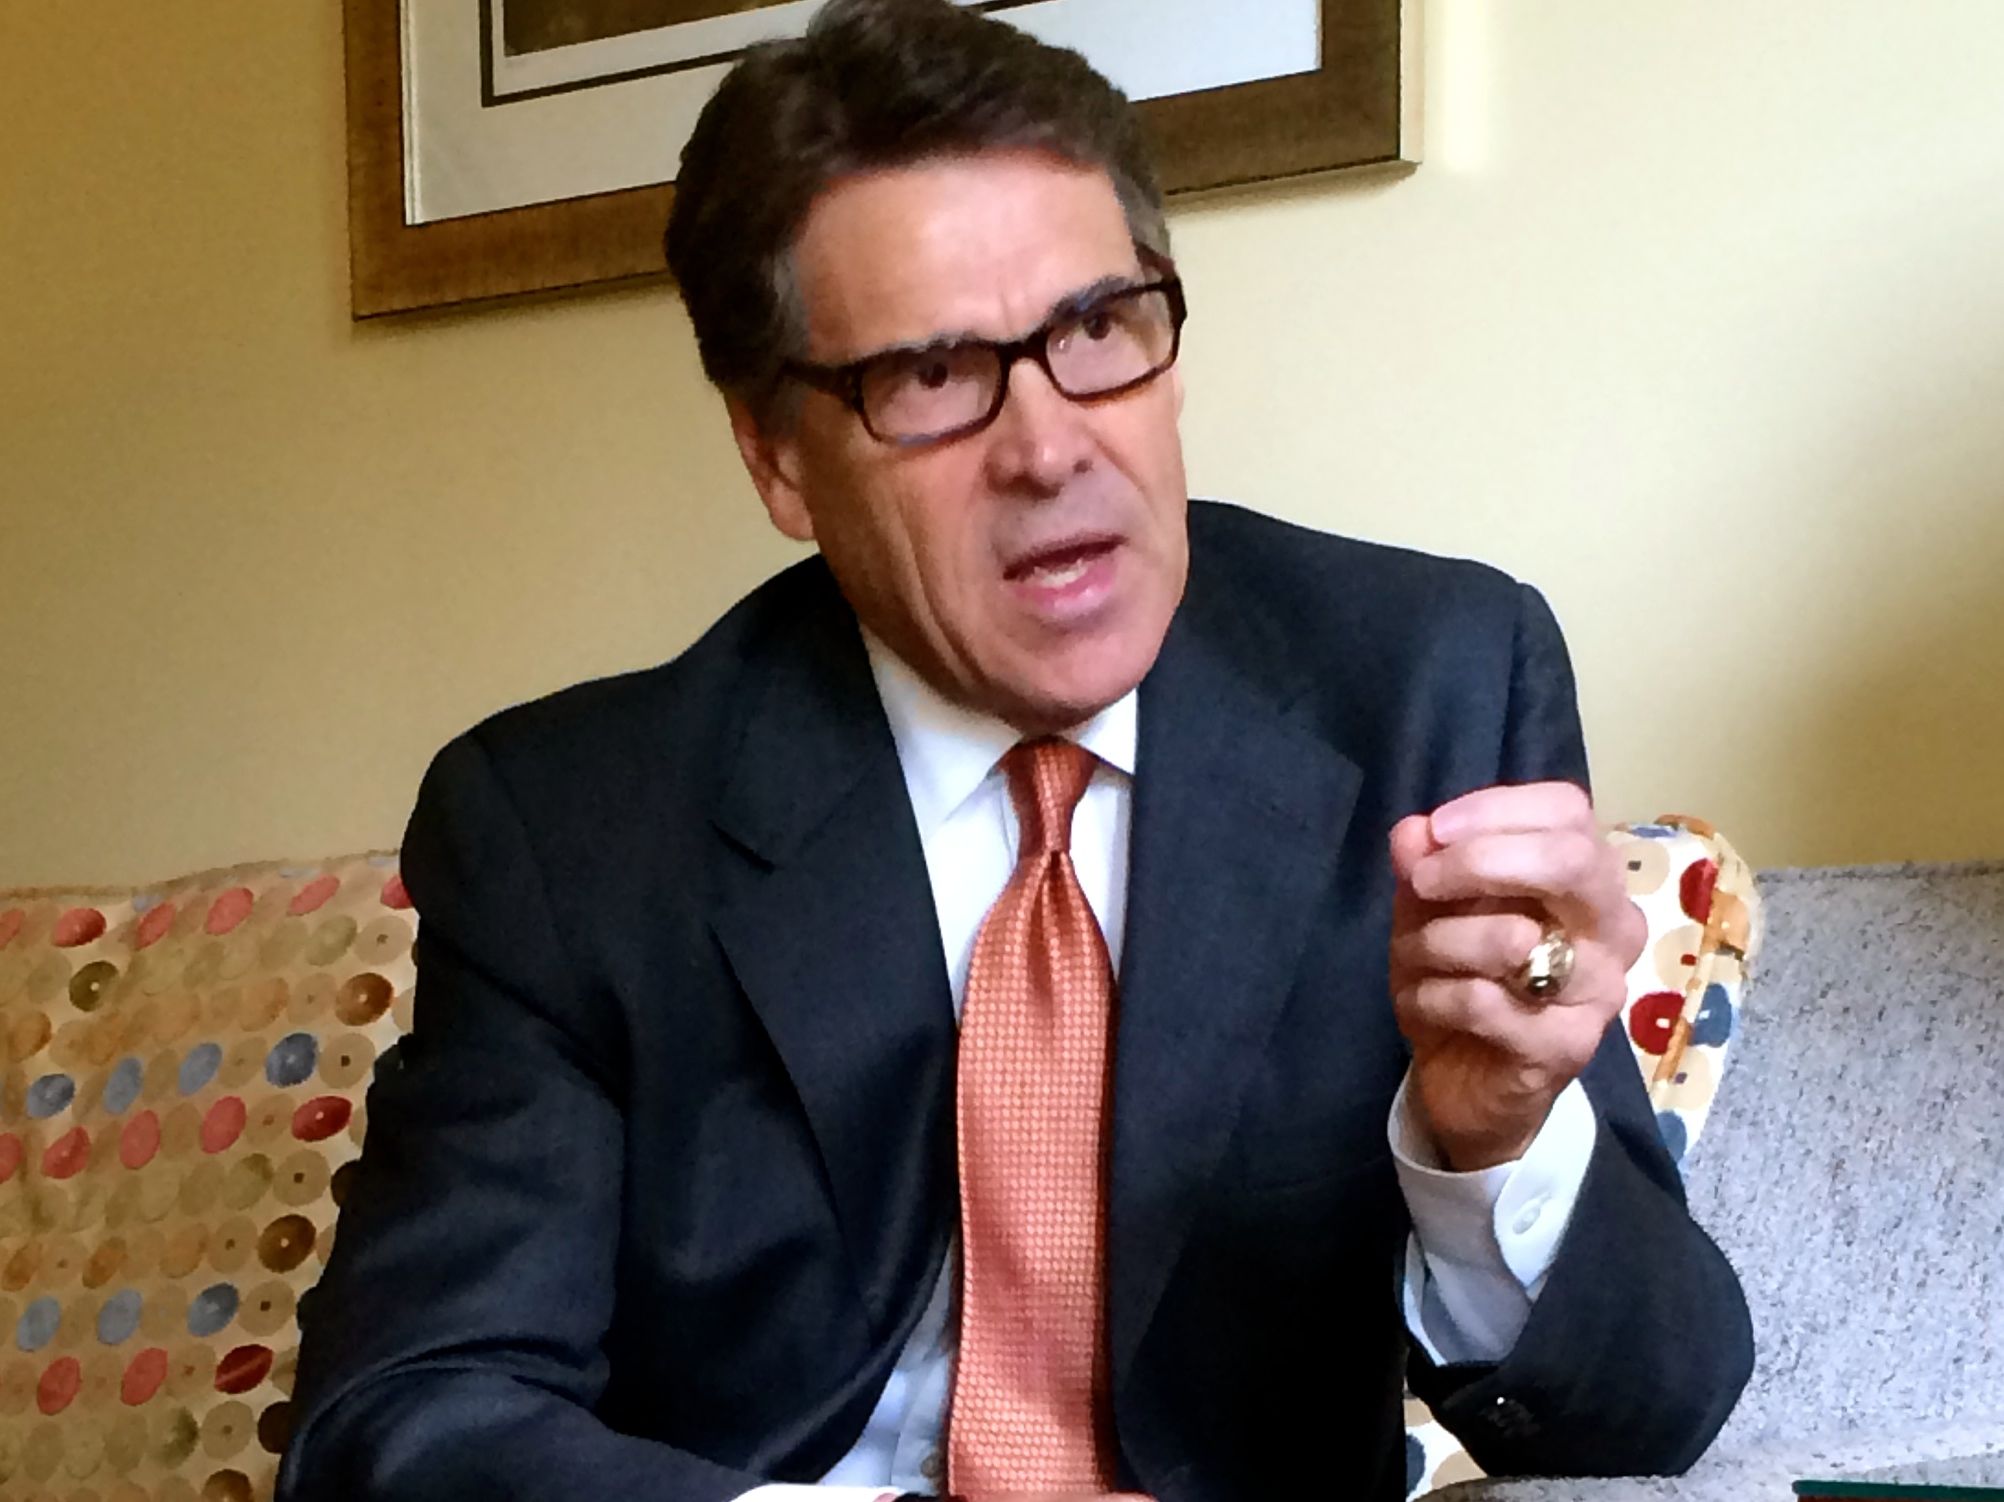 Texas Gov. Perry: 'We Need California to Be the Golden Bear Again'